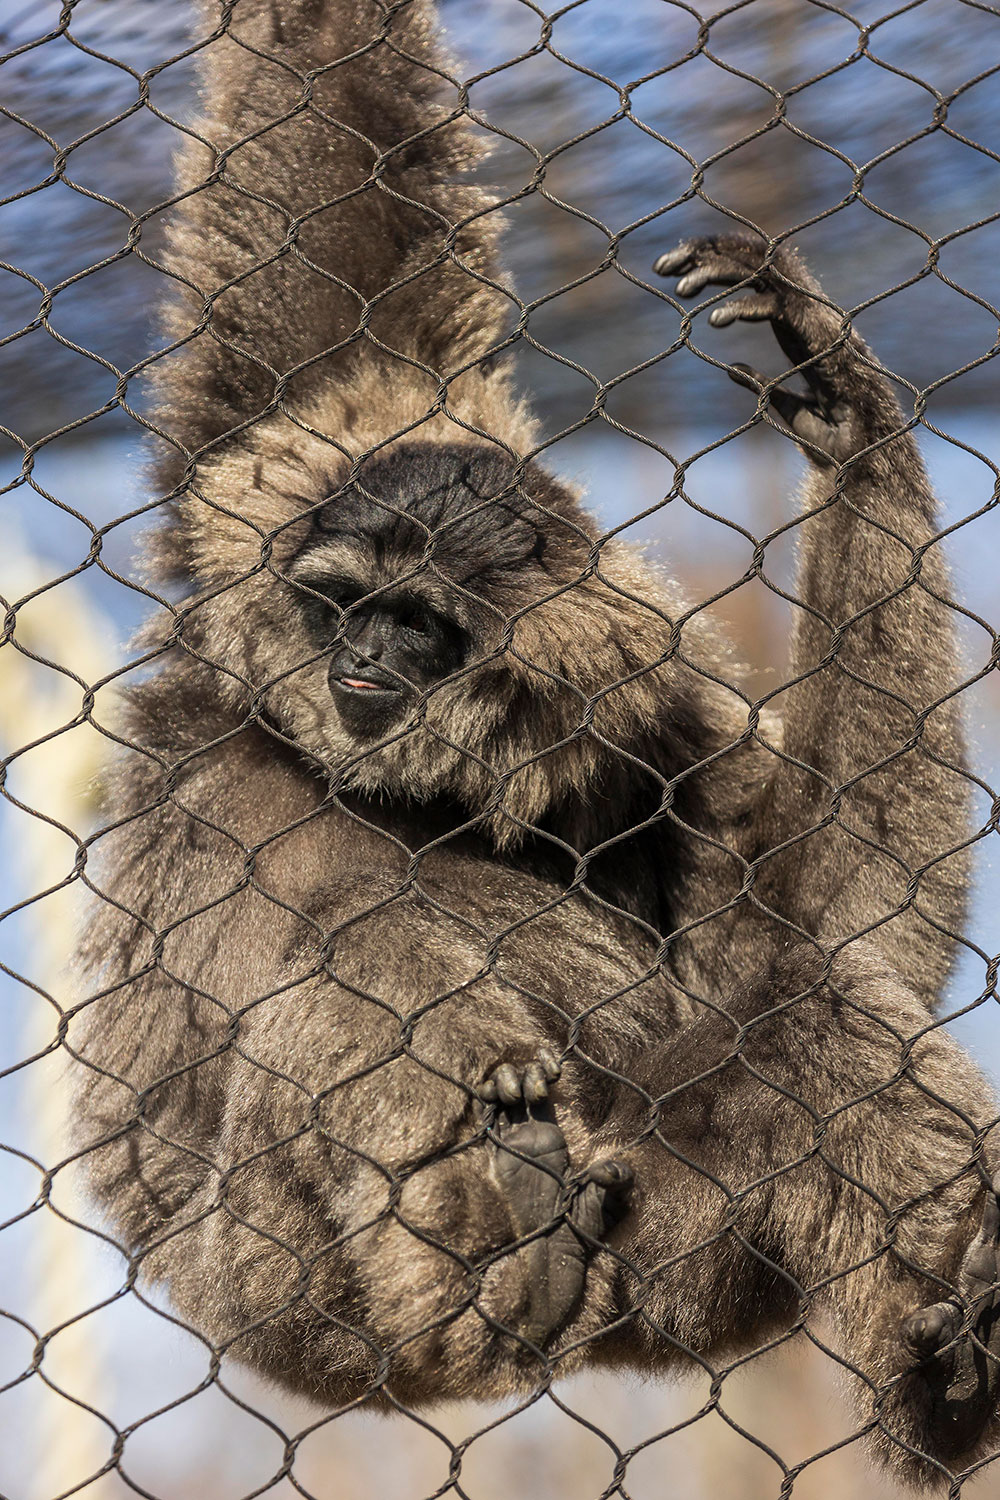 The Greensboro Science Center is home to a family of four javan gibbons (apes, not monkeys).